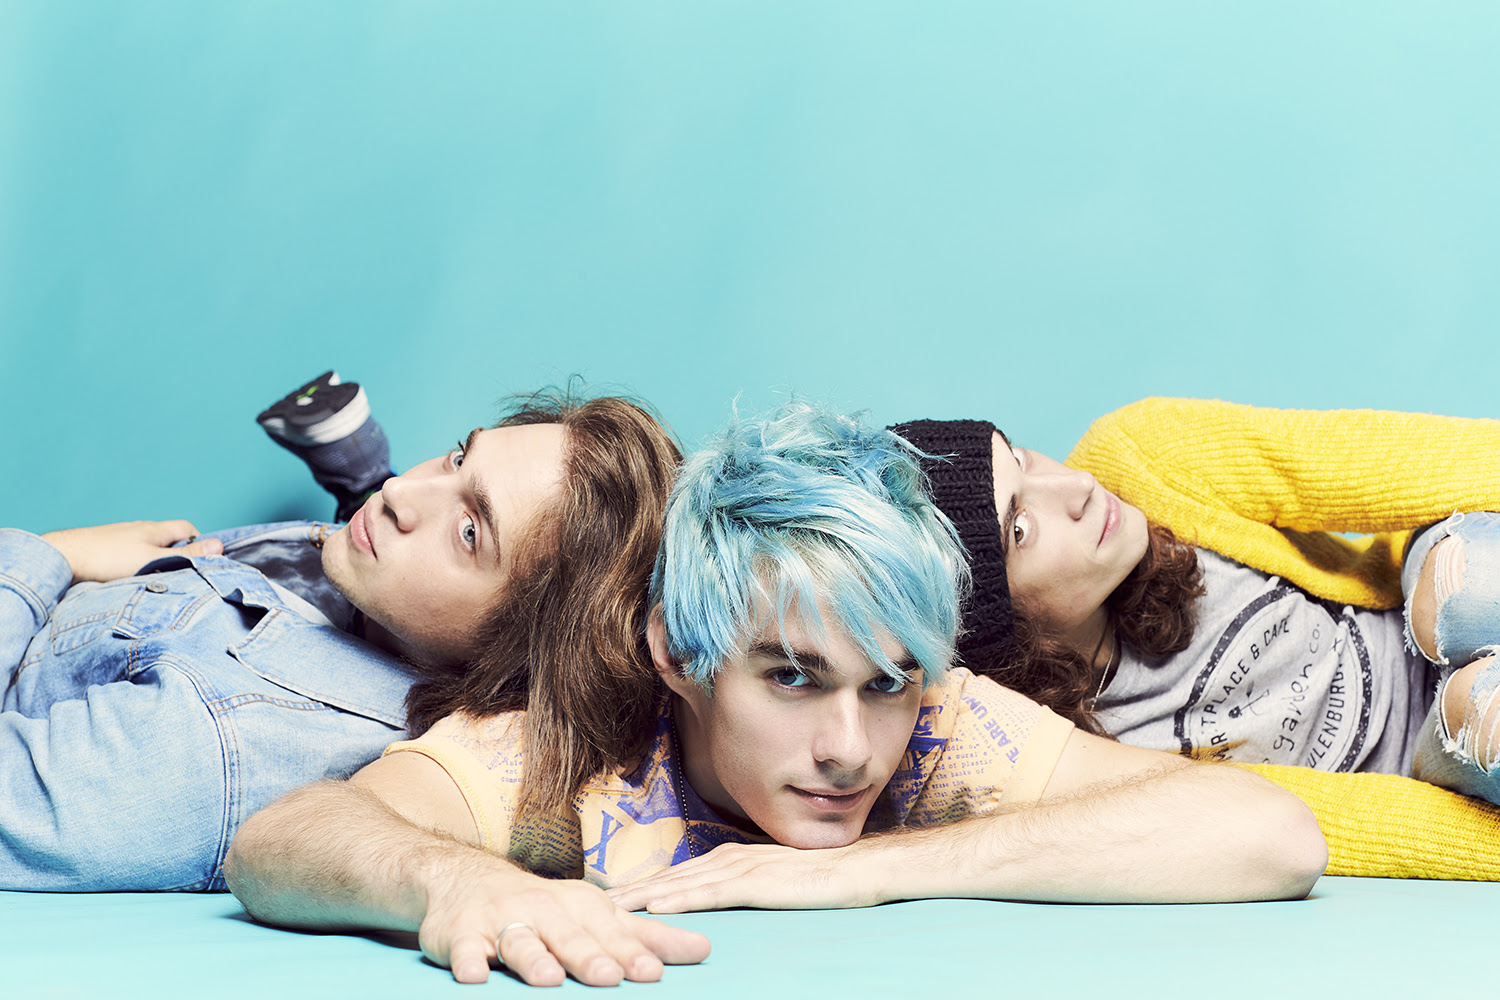 Waterparks Release Music Video For "21 Questions" .